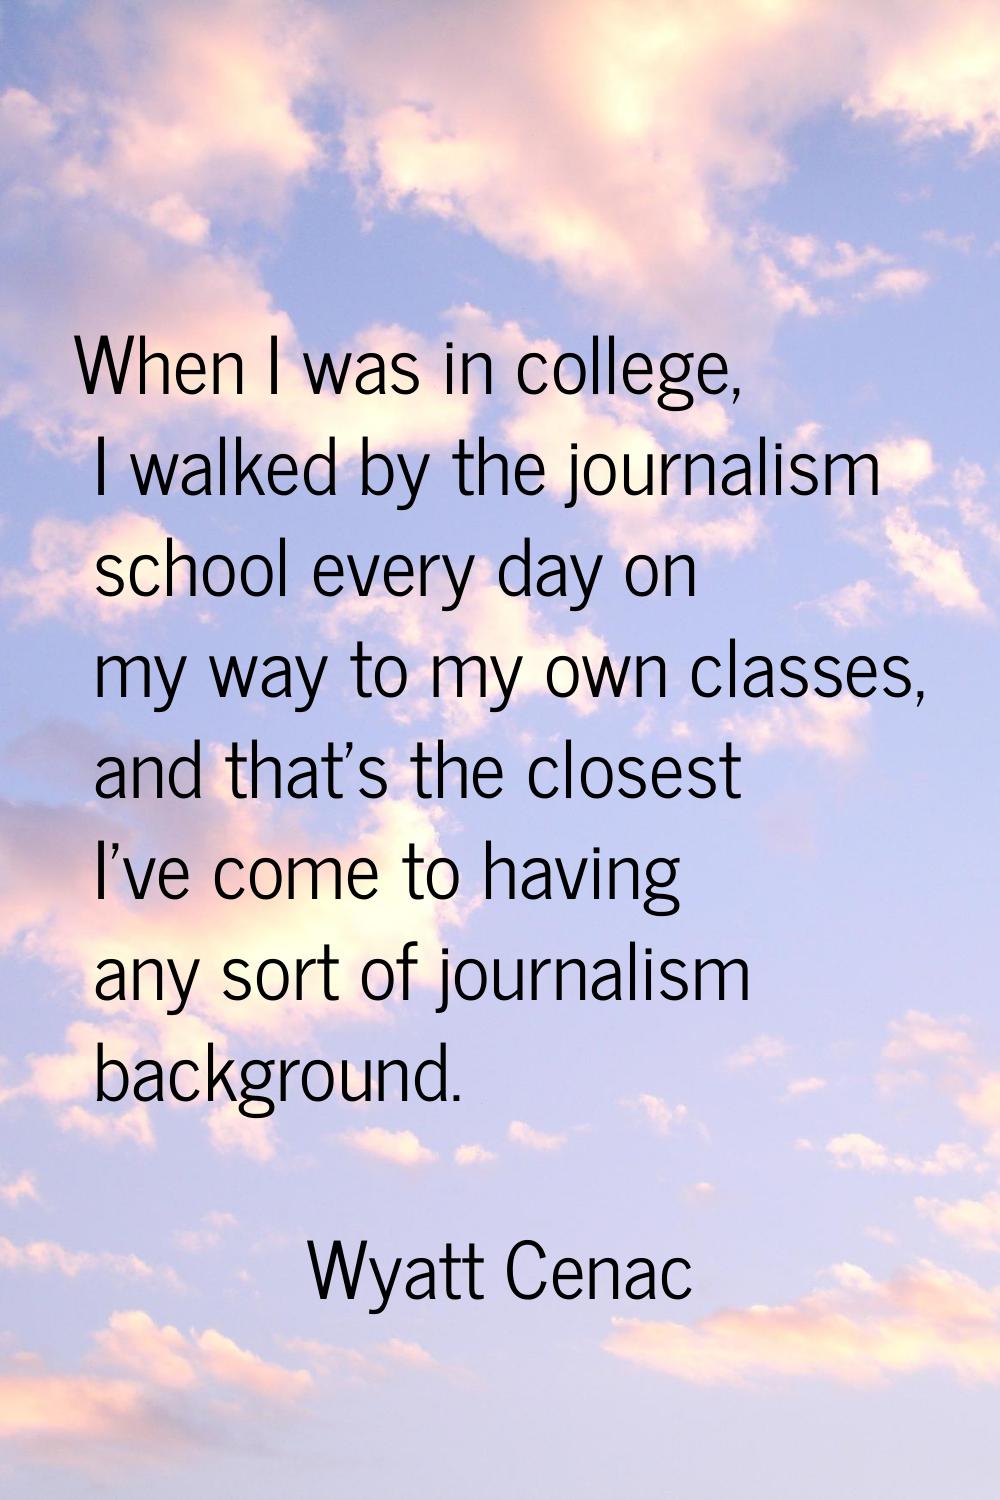 When I was in college, I walked by the journalism school every day on my way to my own classes, and